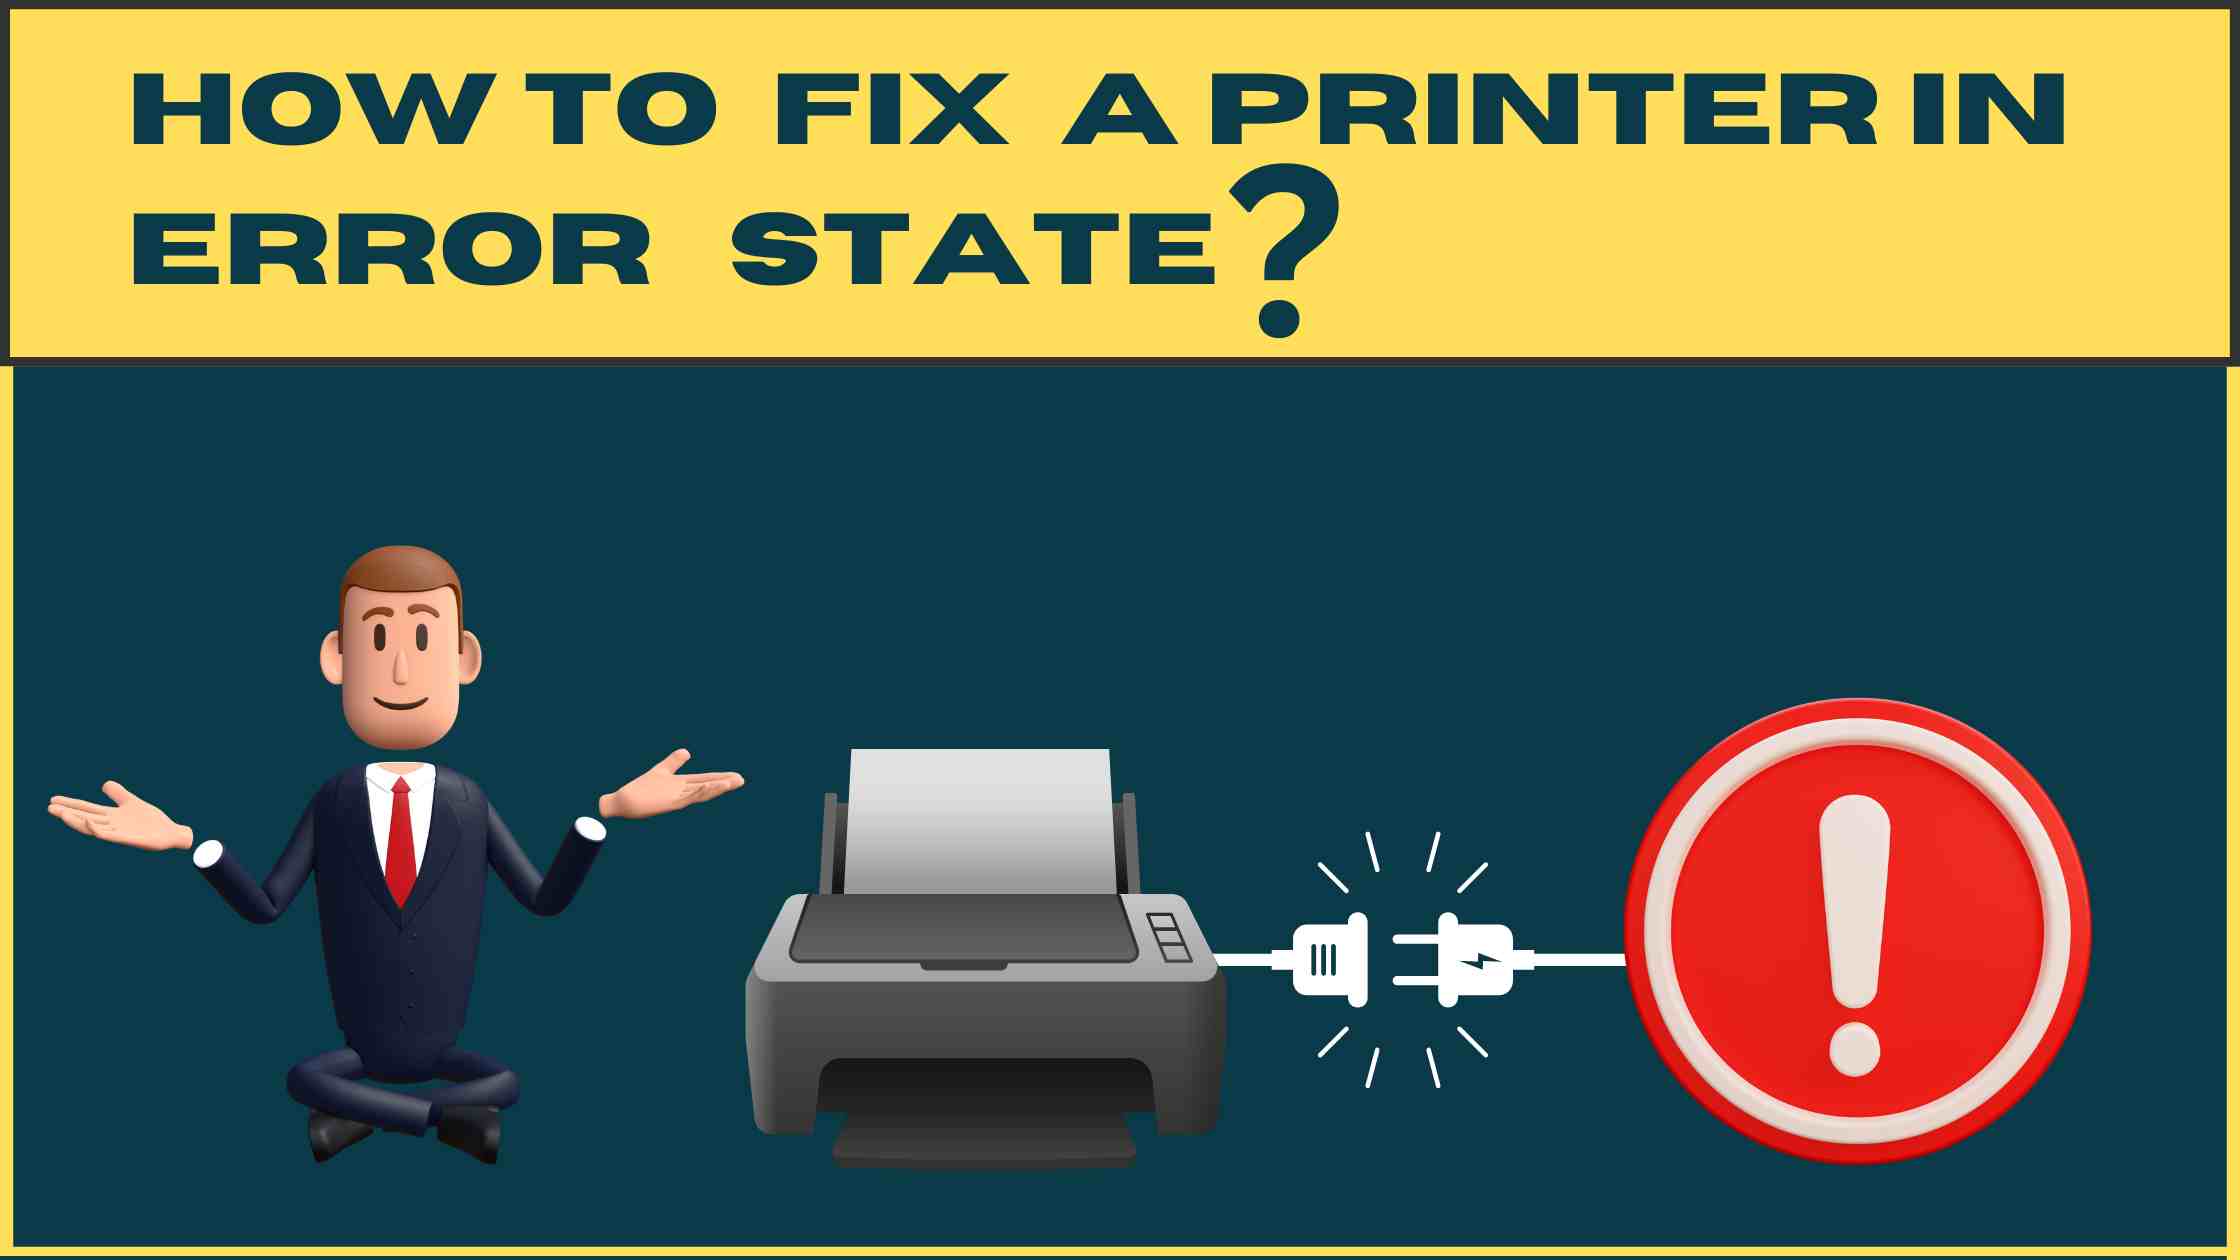 How To fix a printer in error state